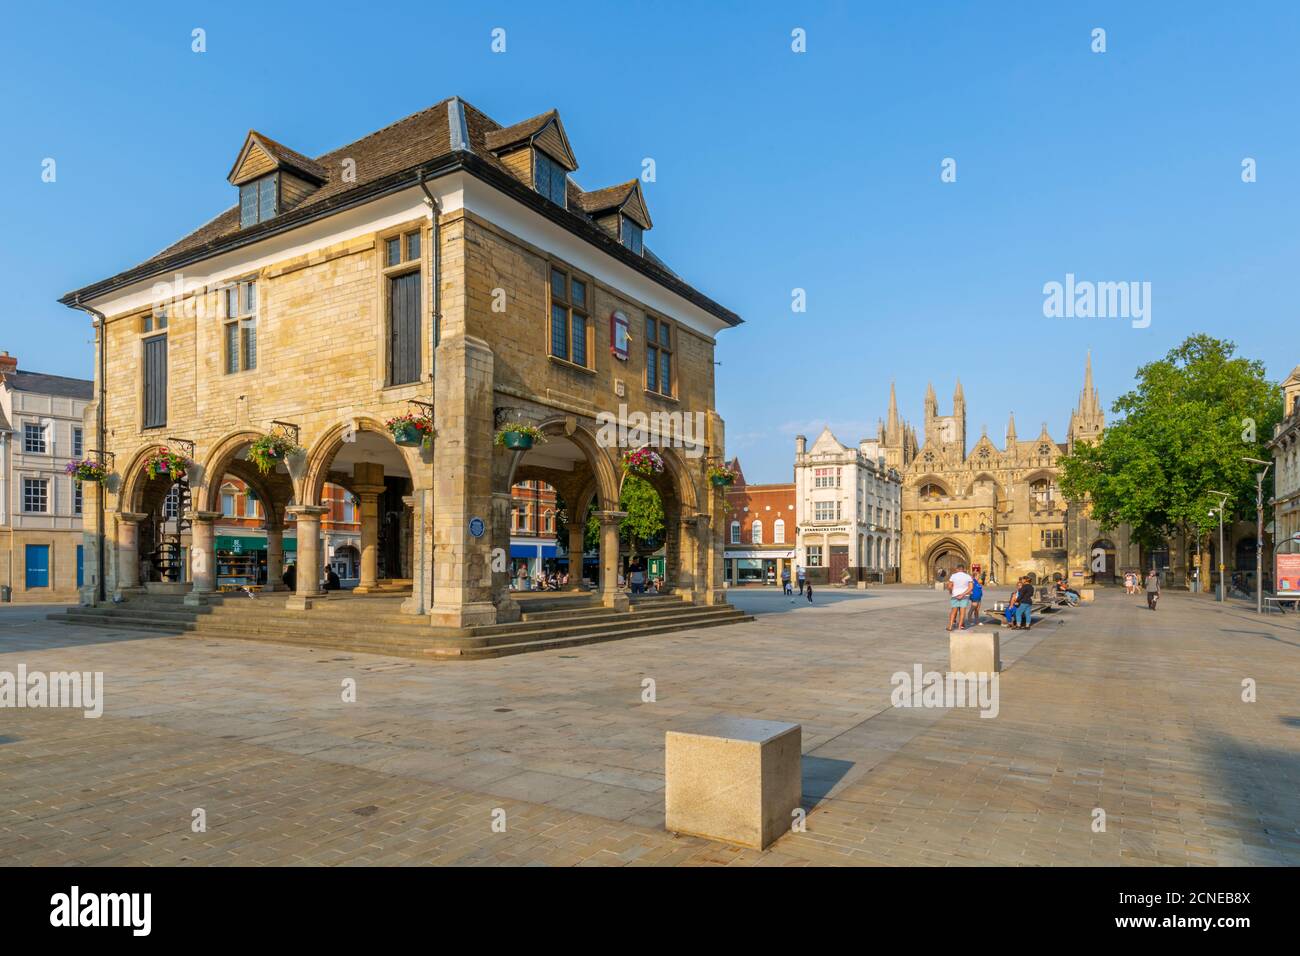 View of Guild Hall in the Town Square, Peterborough, Northamptonshire, England, United Kingdom, Europe Stock Photo